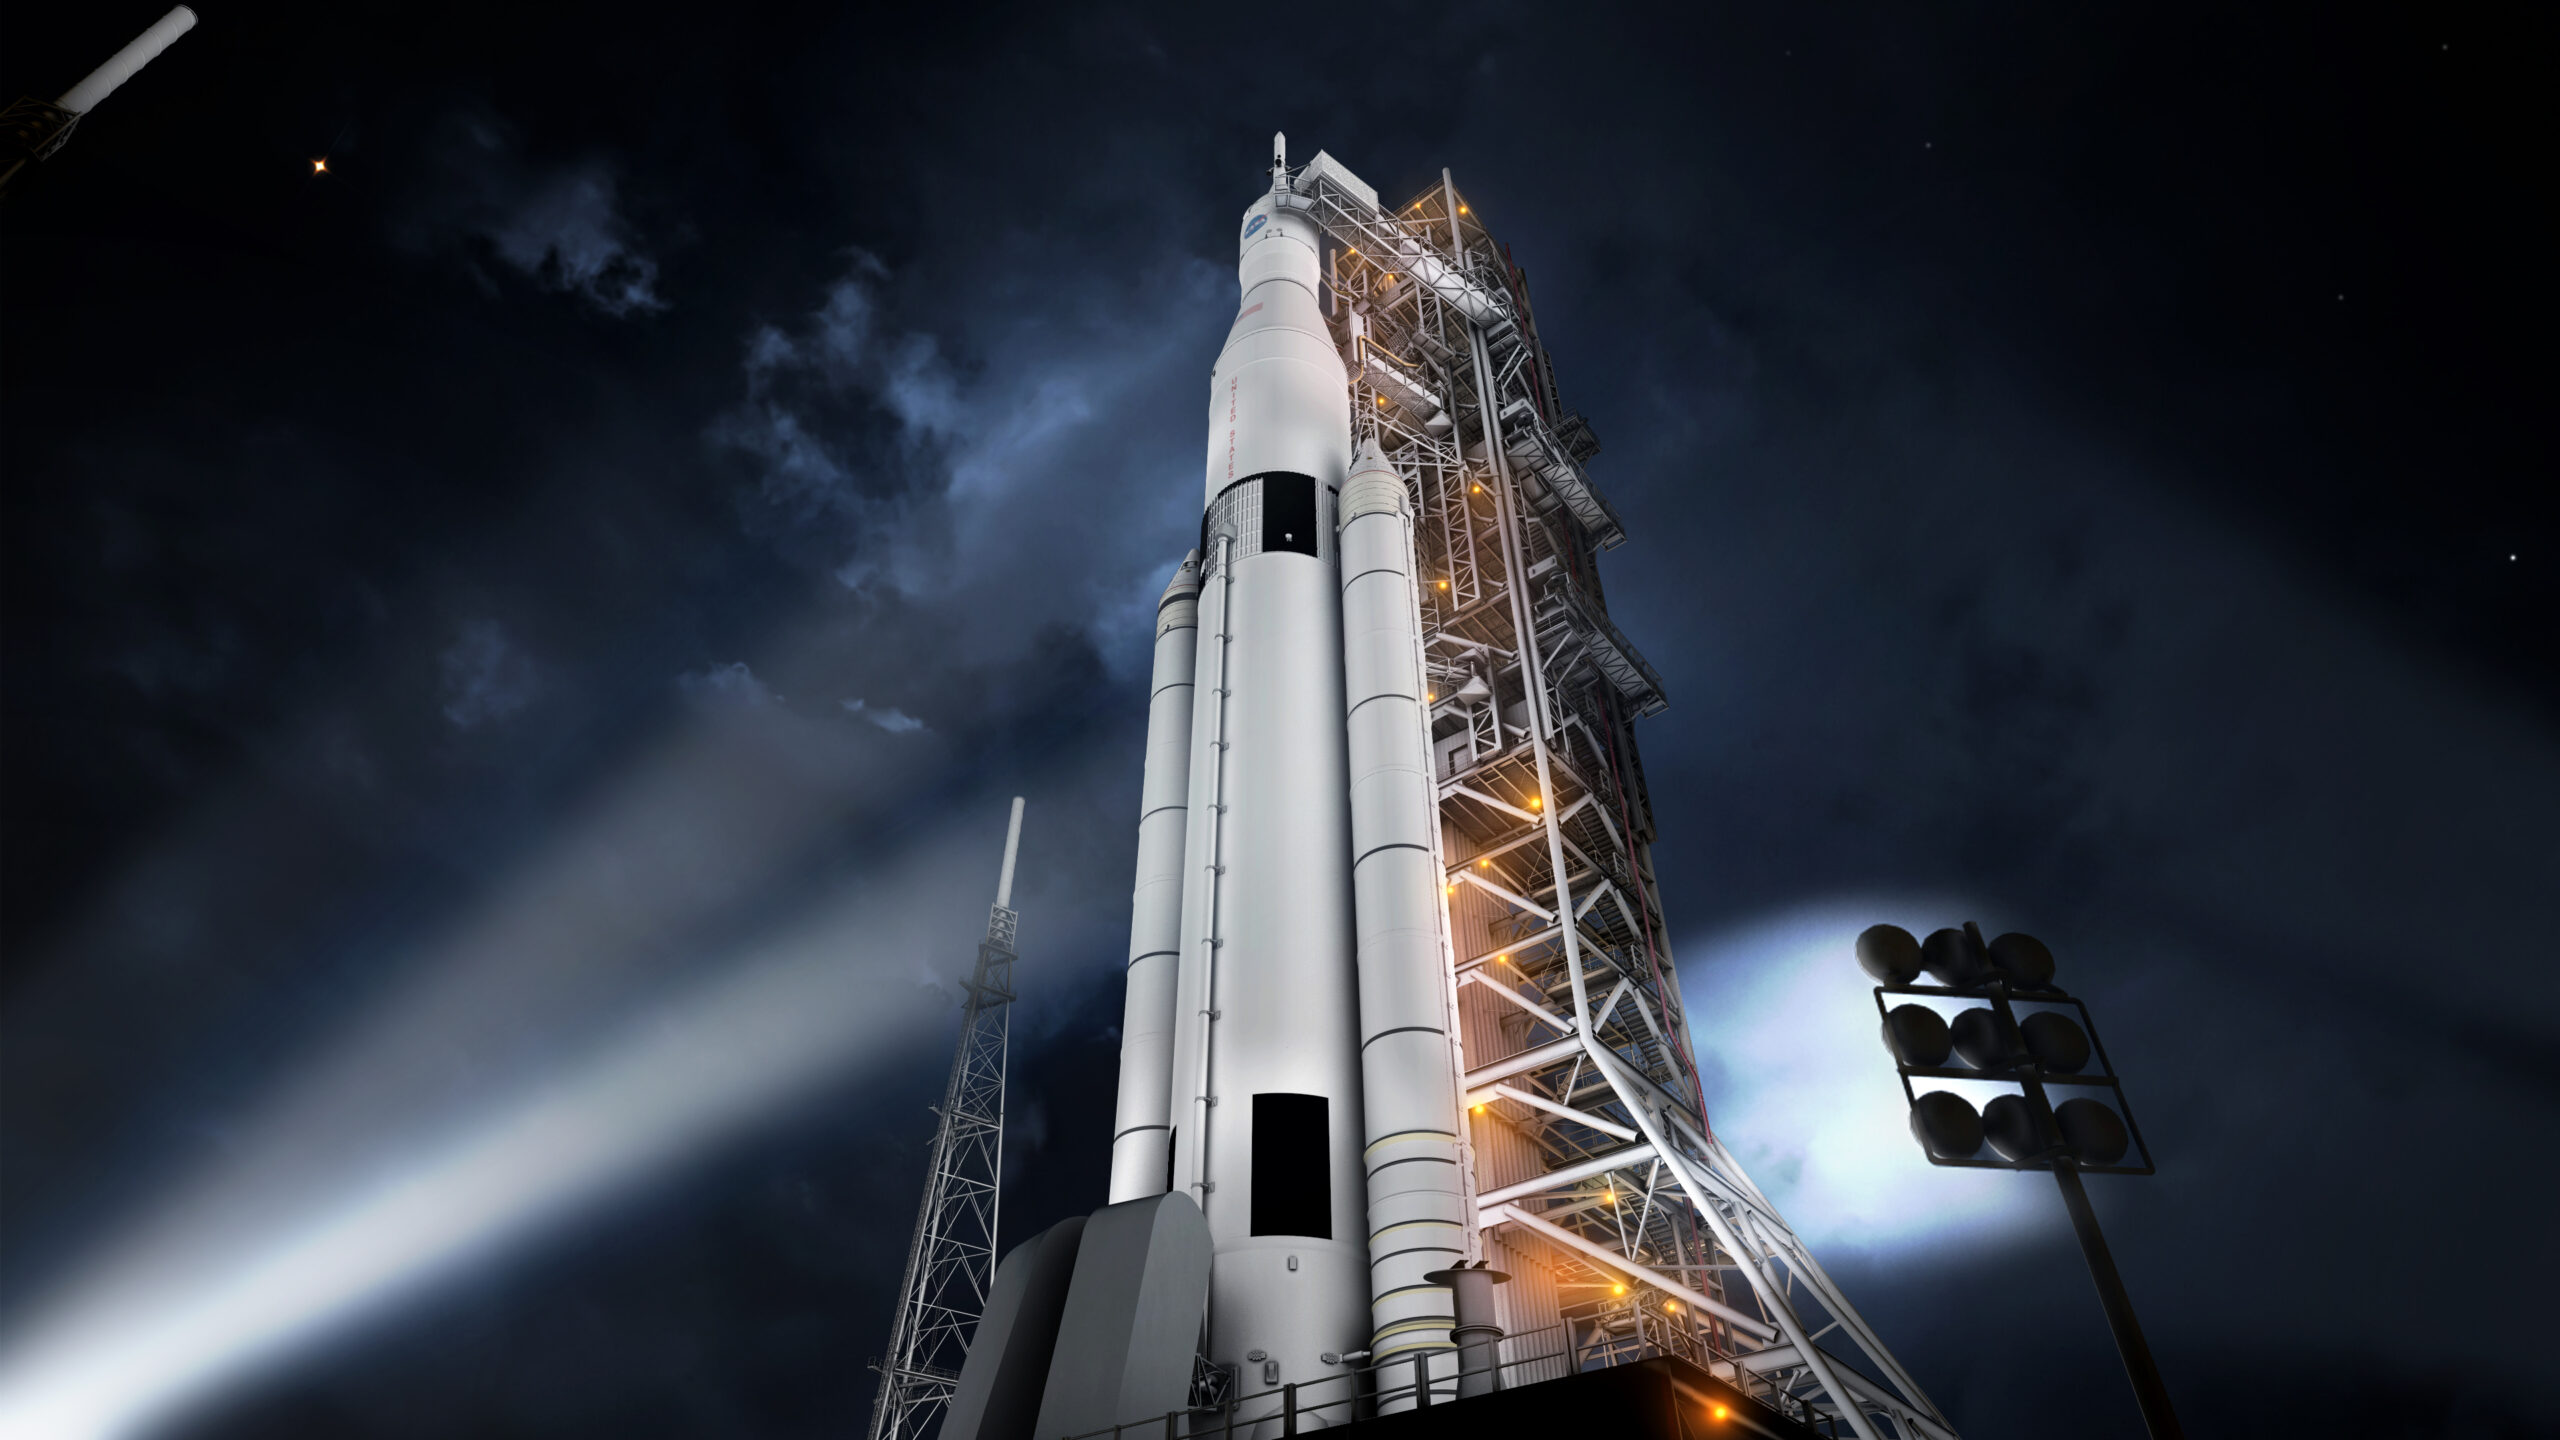 NASA May Be Cutting Corners On Safety Of Mars Rocket And Capsule, Report Finds